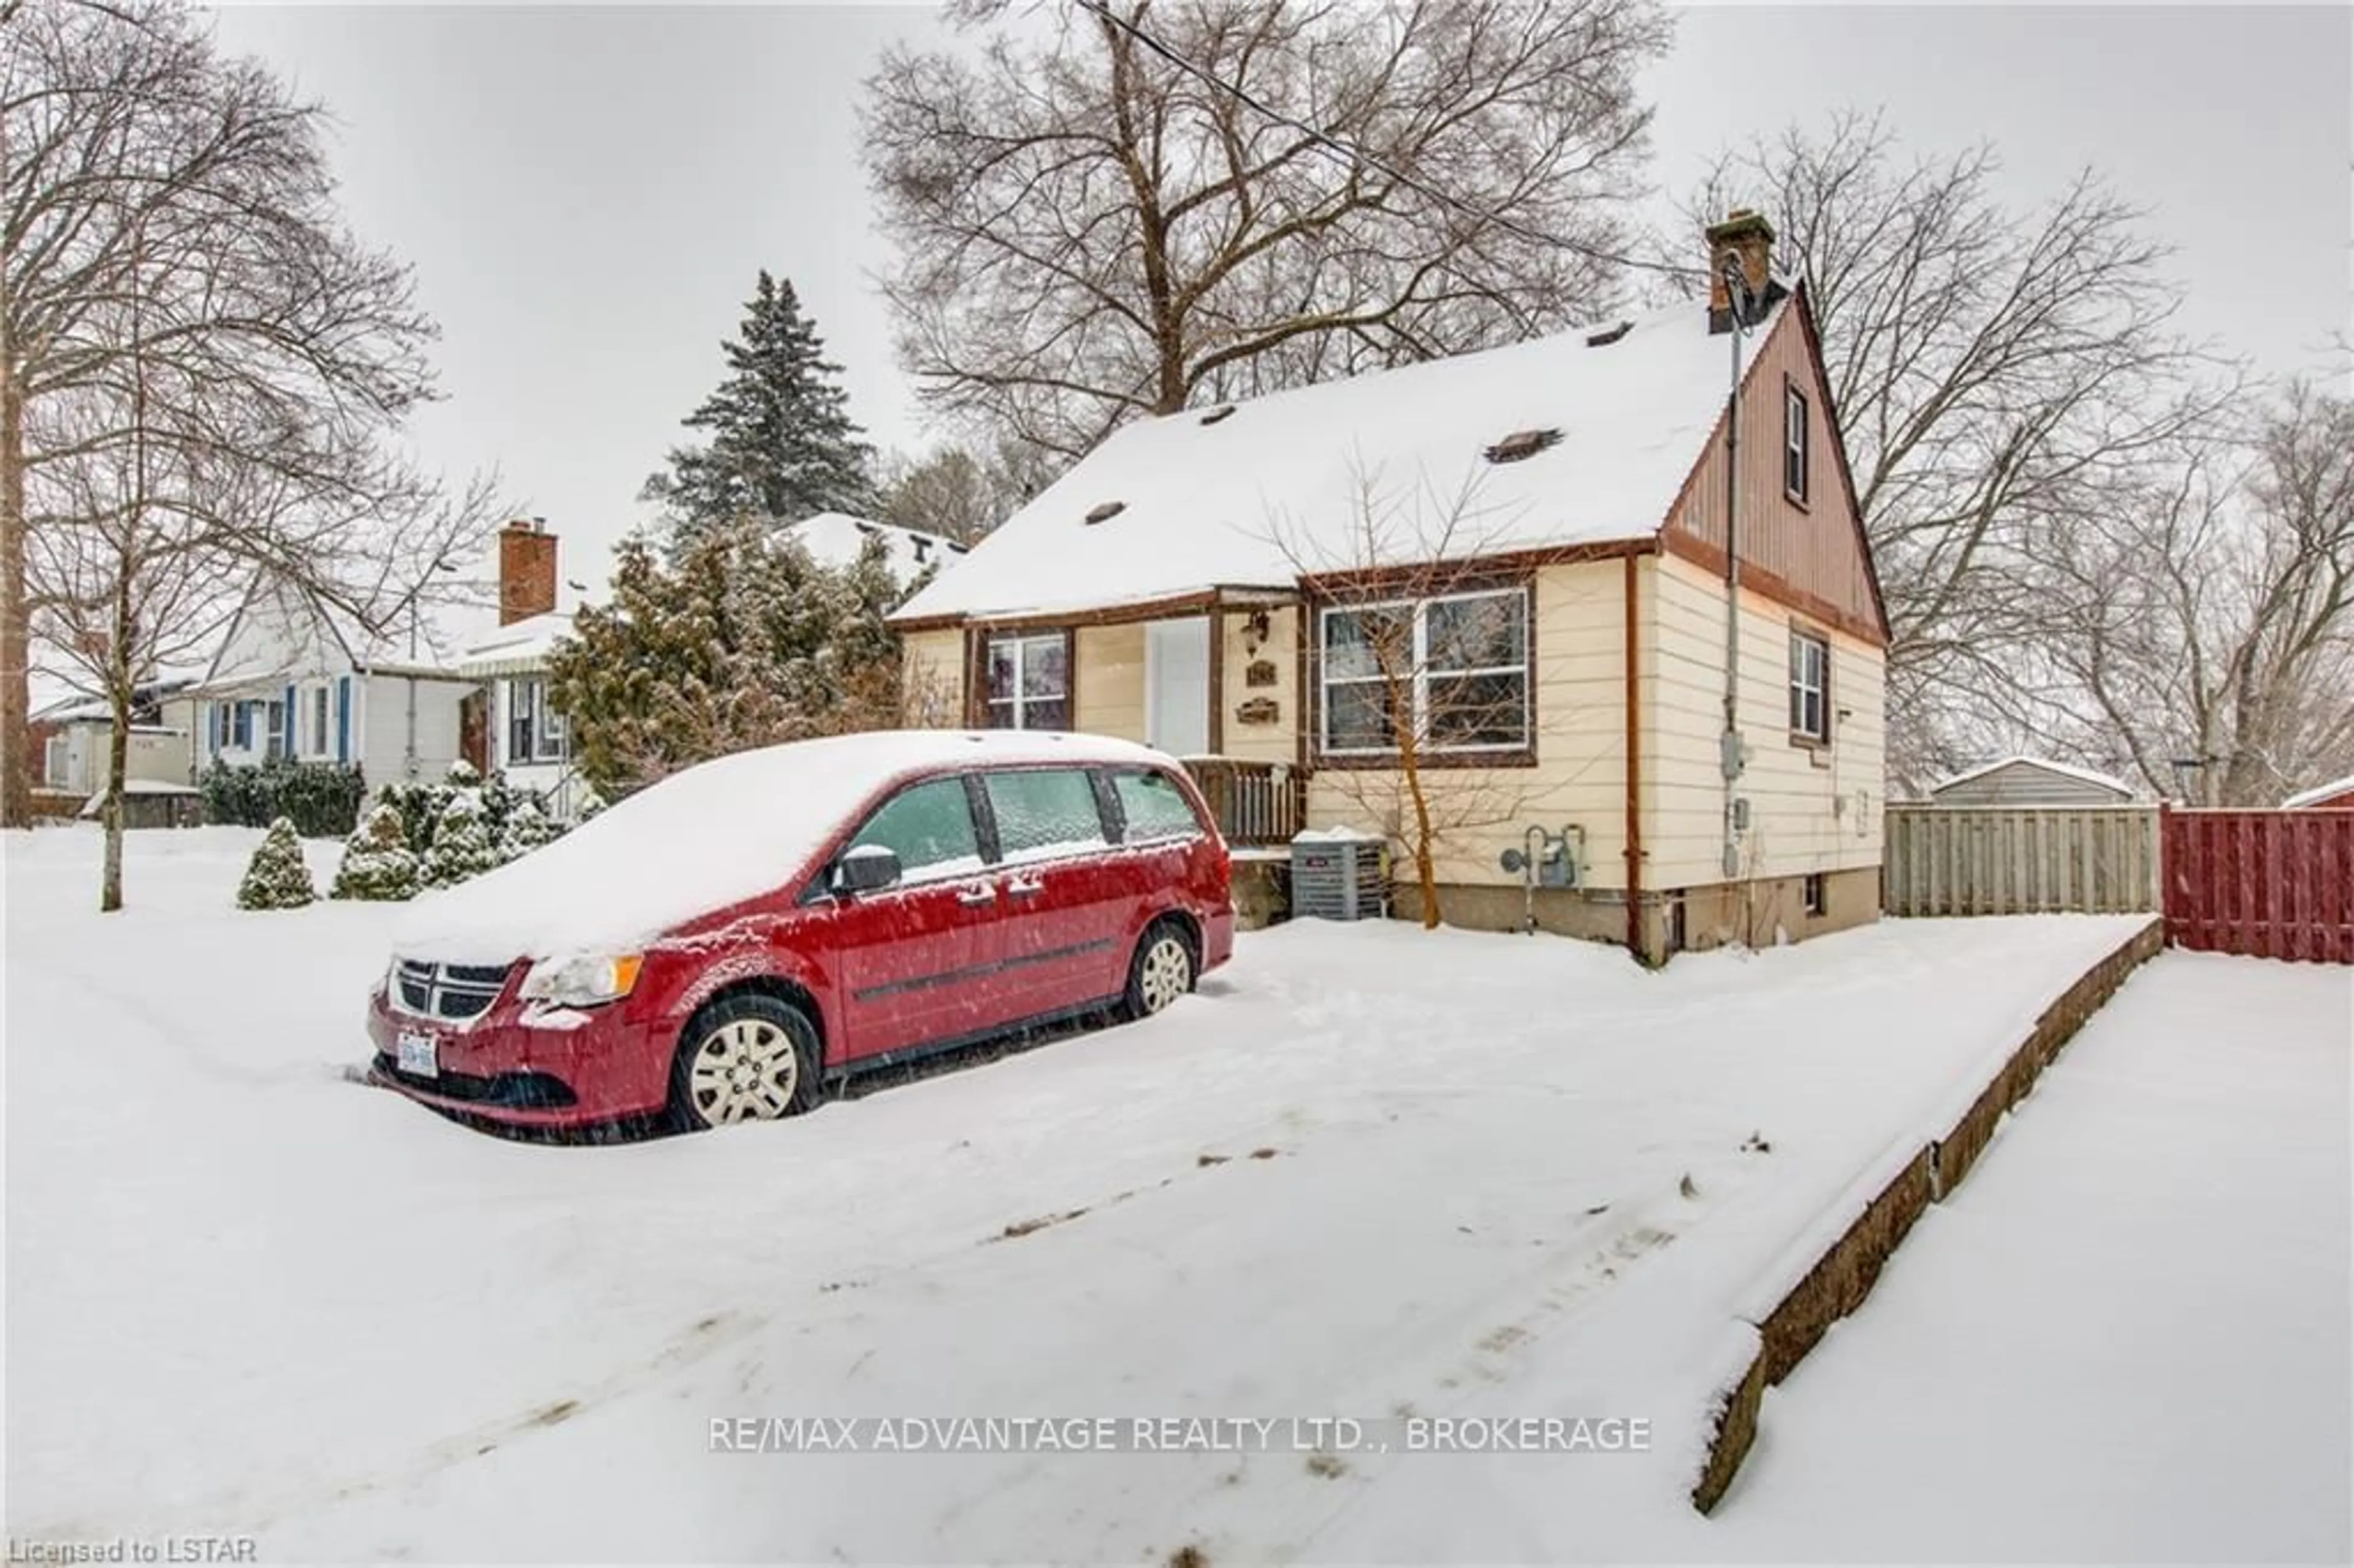 Street view for 1185 Albany St, London Ontario N5W 3L6